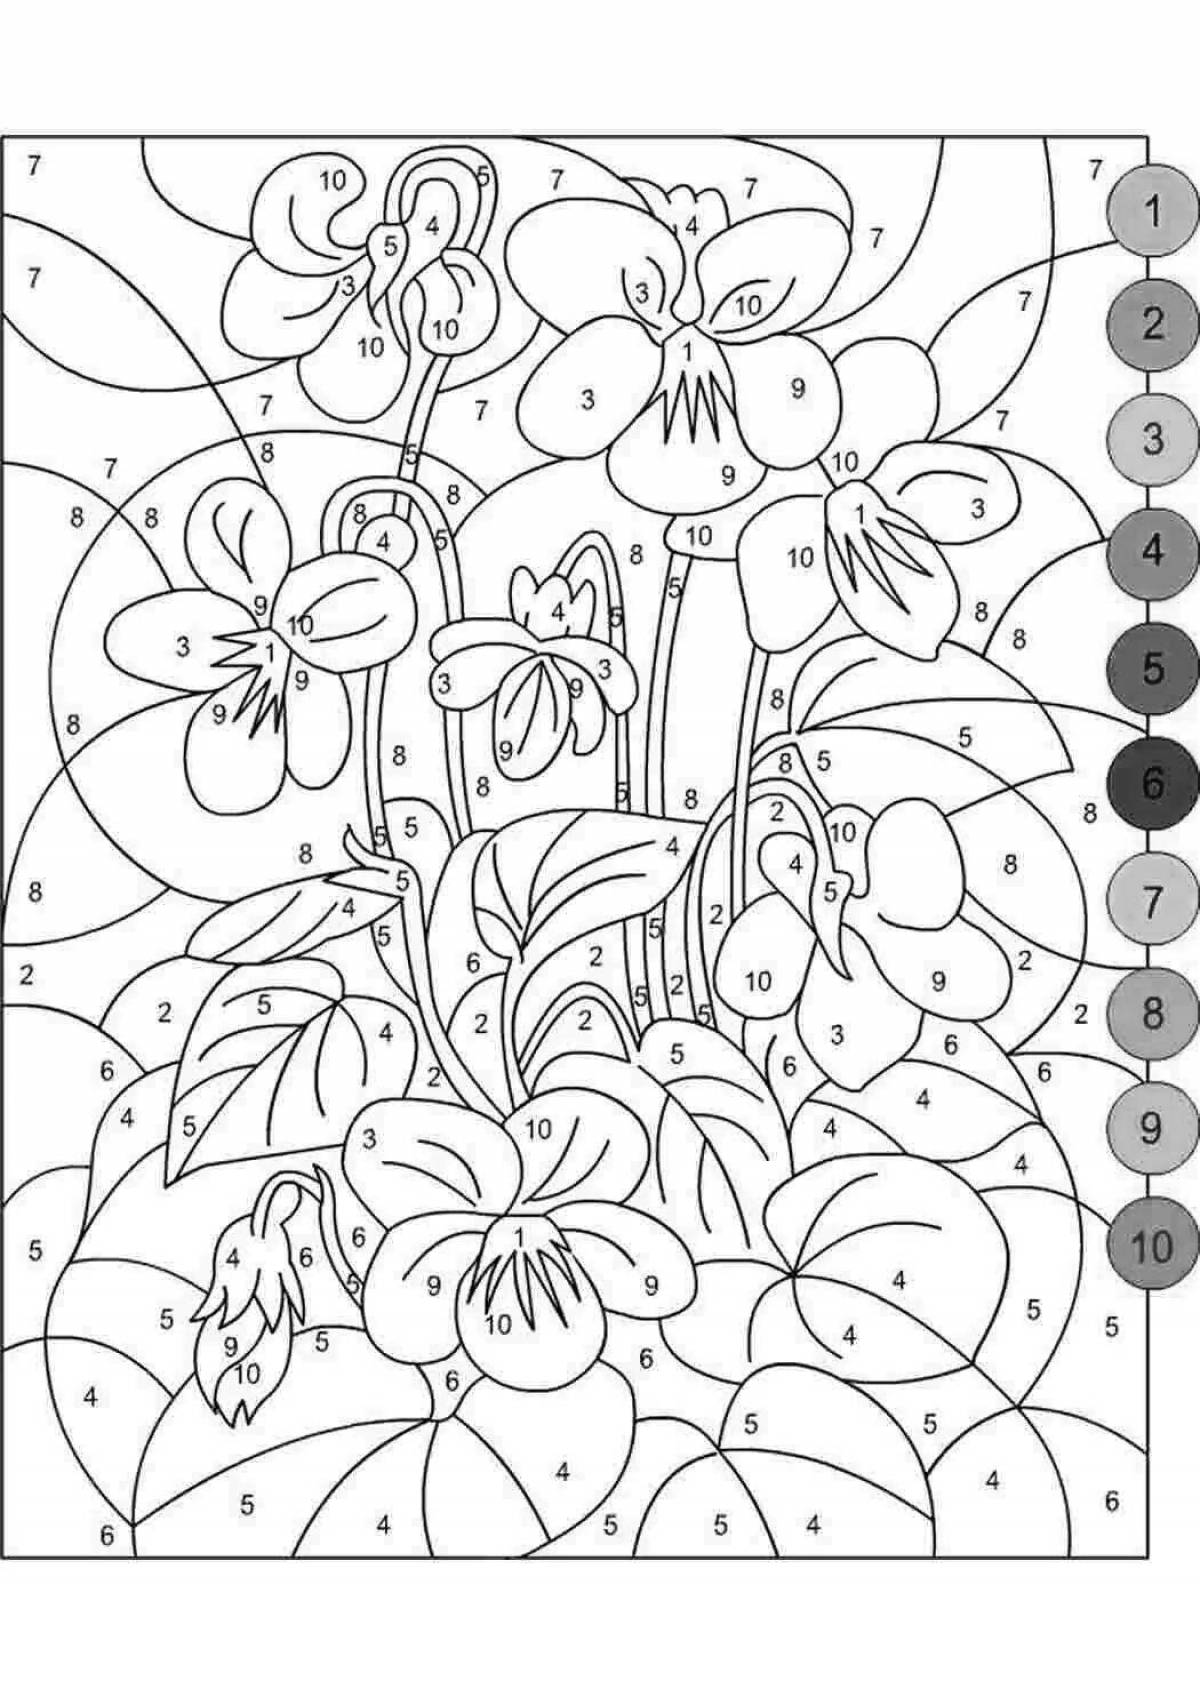 Charming coloring book how to find